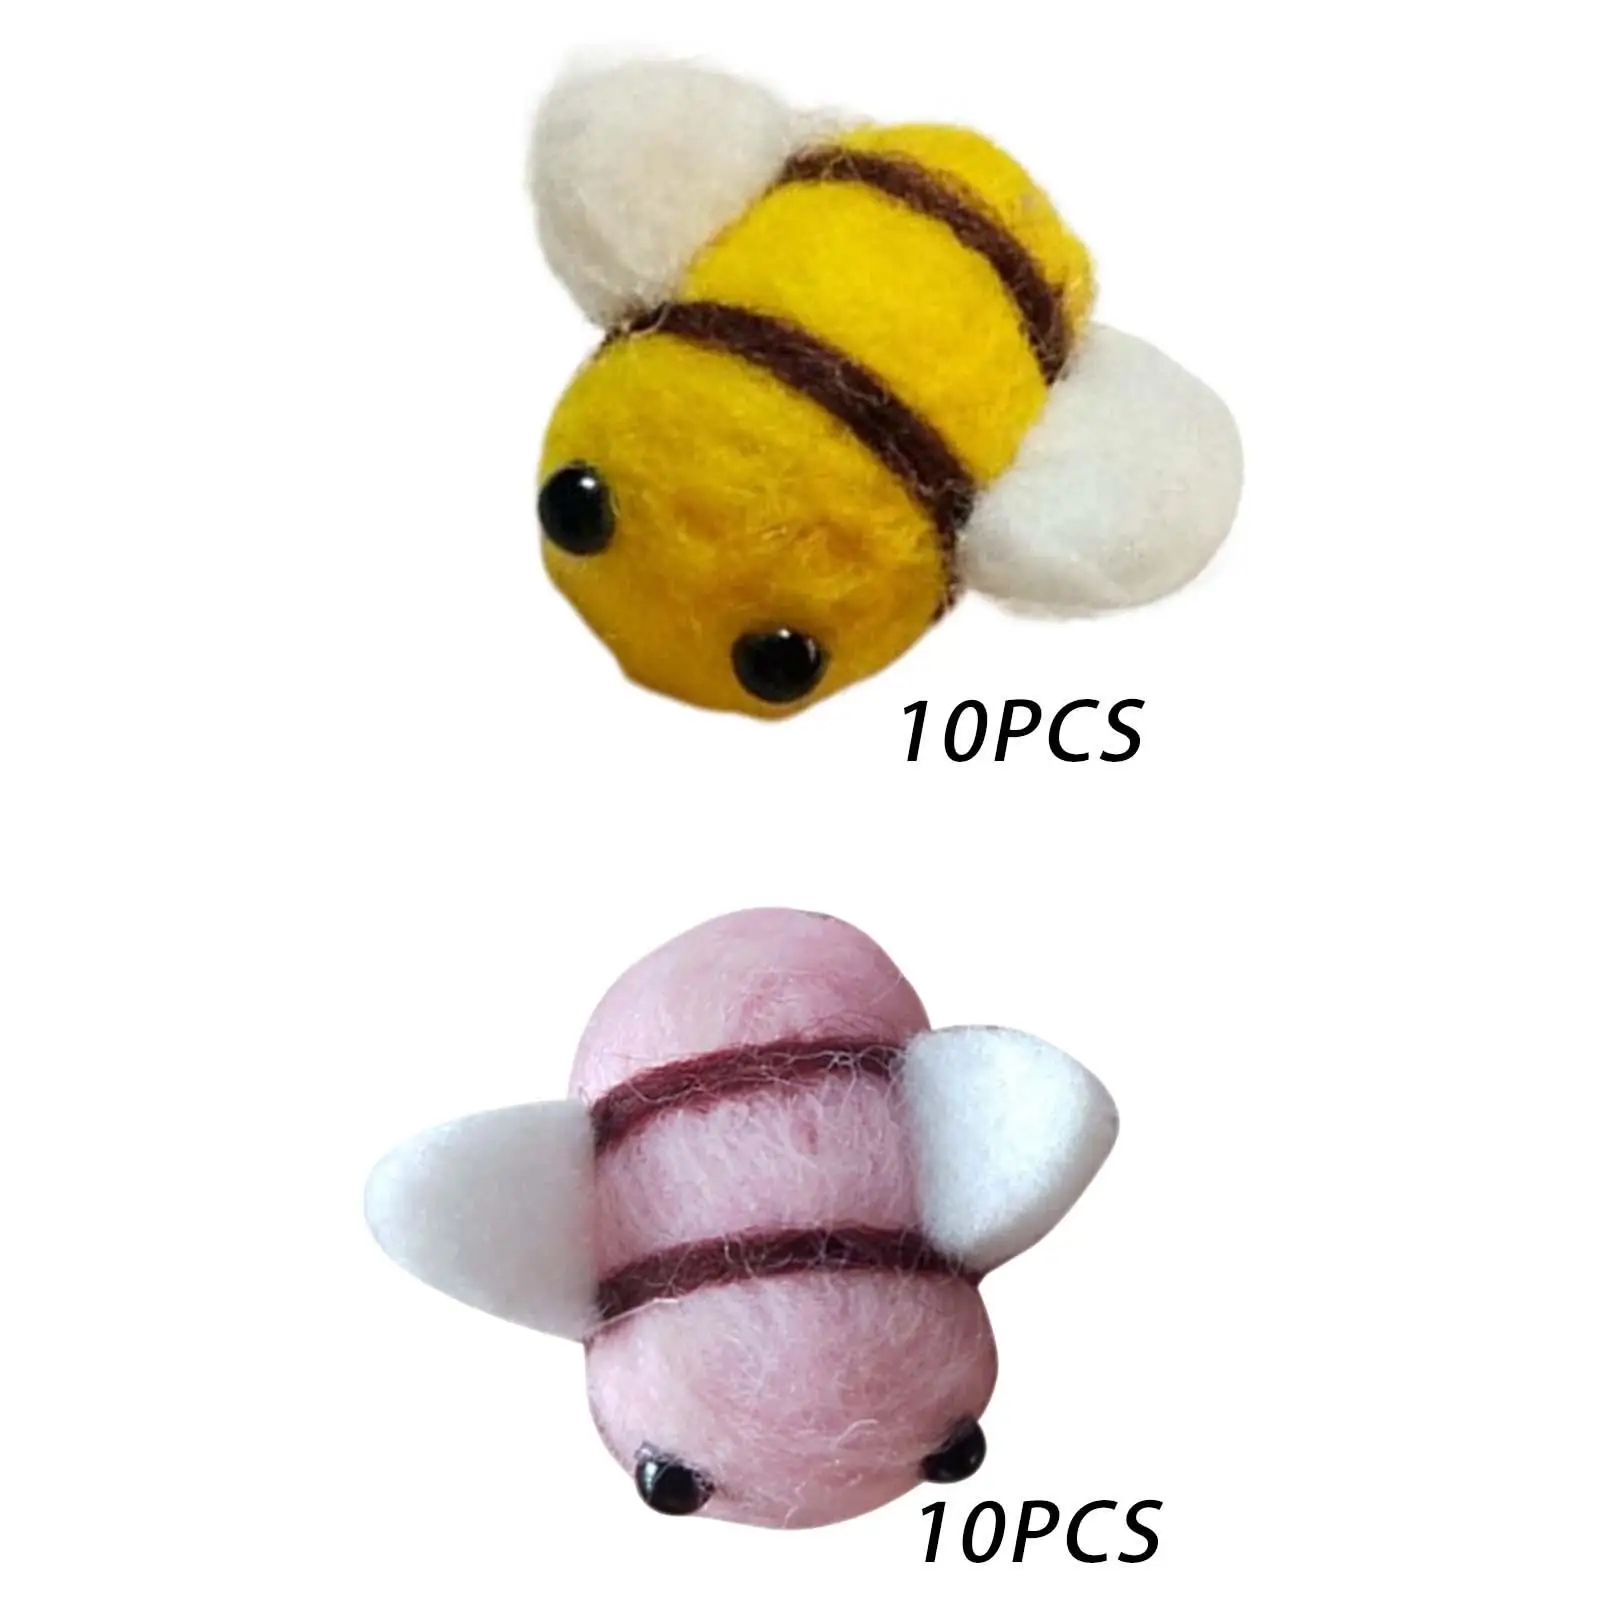 10Pcs Bumble Bee Ornament Needle Felted Bees Decortaive DIY Crafts for Baby Clothing Hair Clips Baby Shower Nursery Decoration